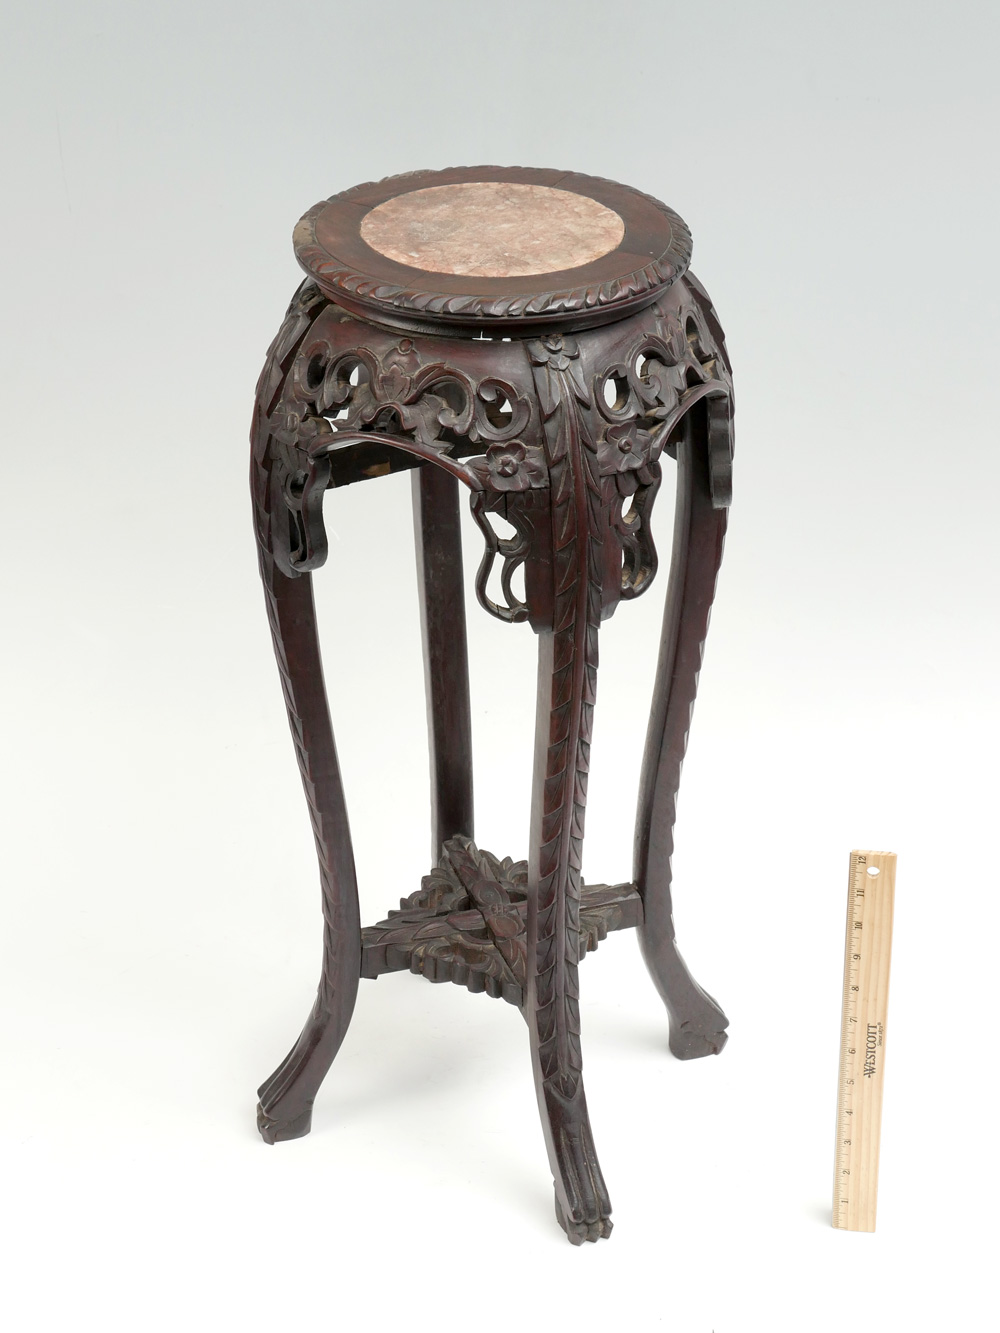 CHINESE MARBLE TOP FERN STAND: